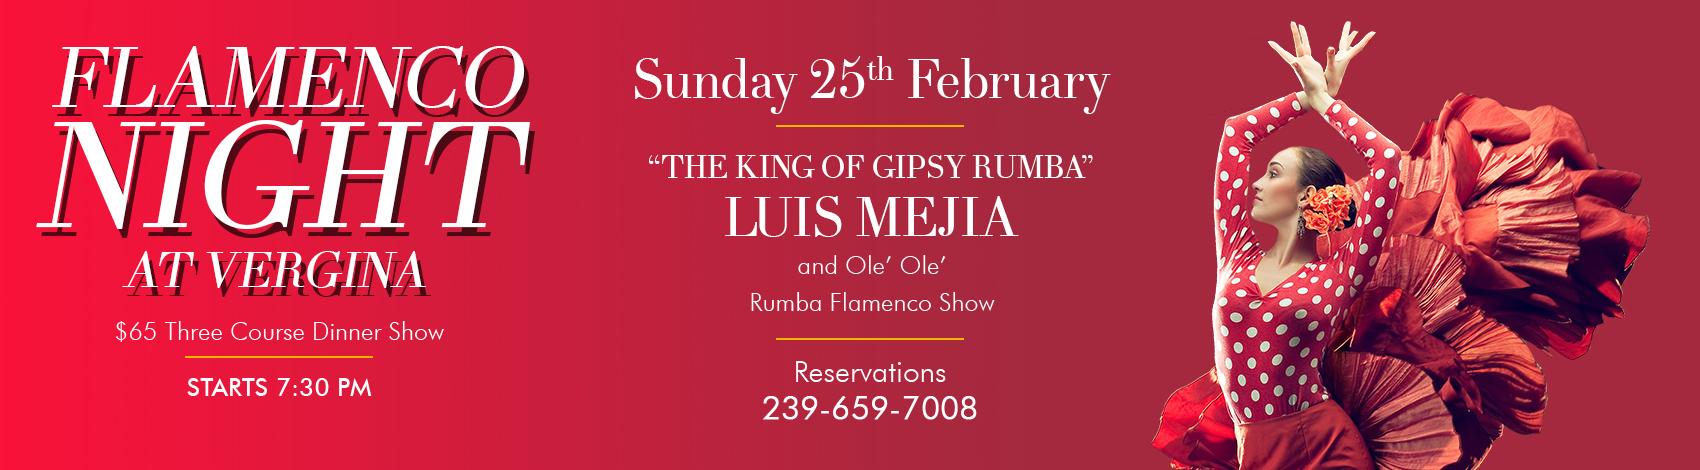 February 25th The King of Gipsy Rumba LUIS MEJIA and Ole’ Ole’ Rumba Flamenco Show, Three Course Dinner Show Menu $65 Per Person